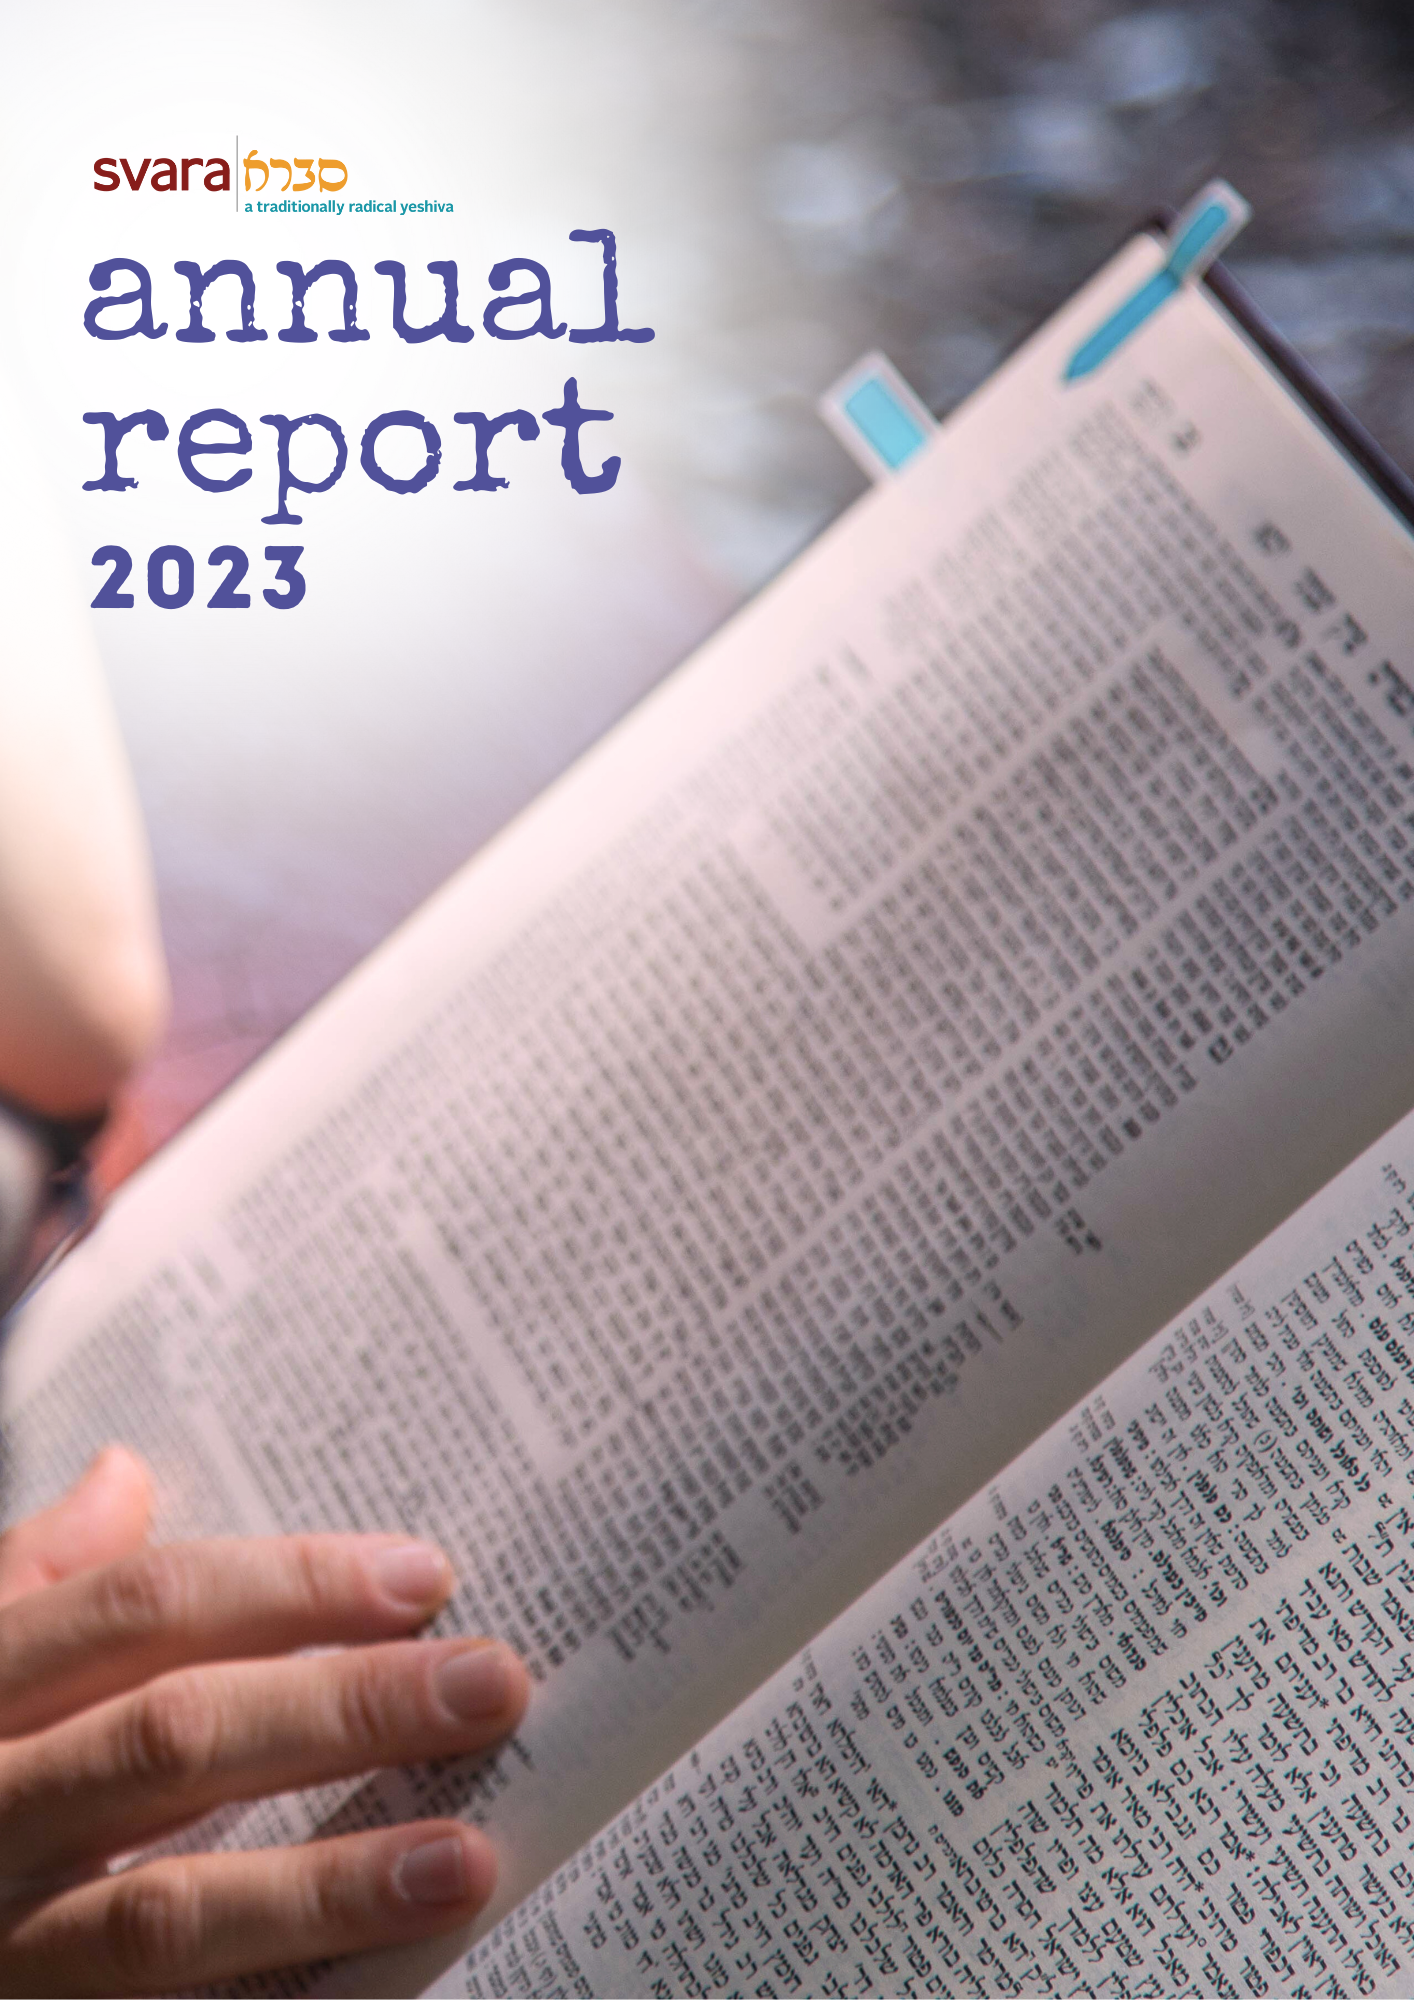 The cover page of SVARA's 2023 annual report. The image is a close-up of a masechet, which has two blue stickies on its pages. Someone's hand can be seen resting on the lower part of the daf.